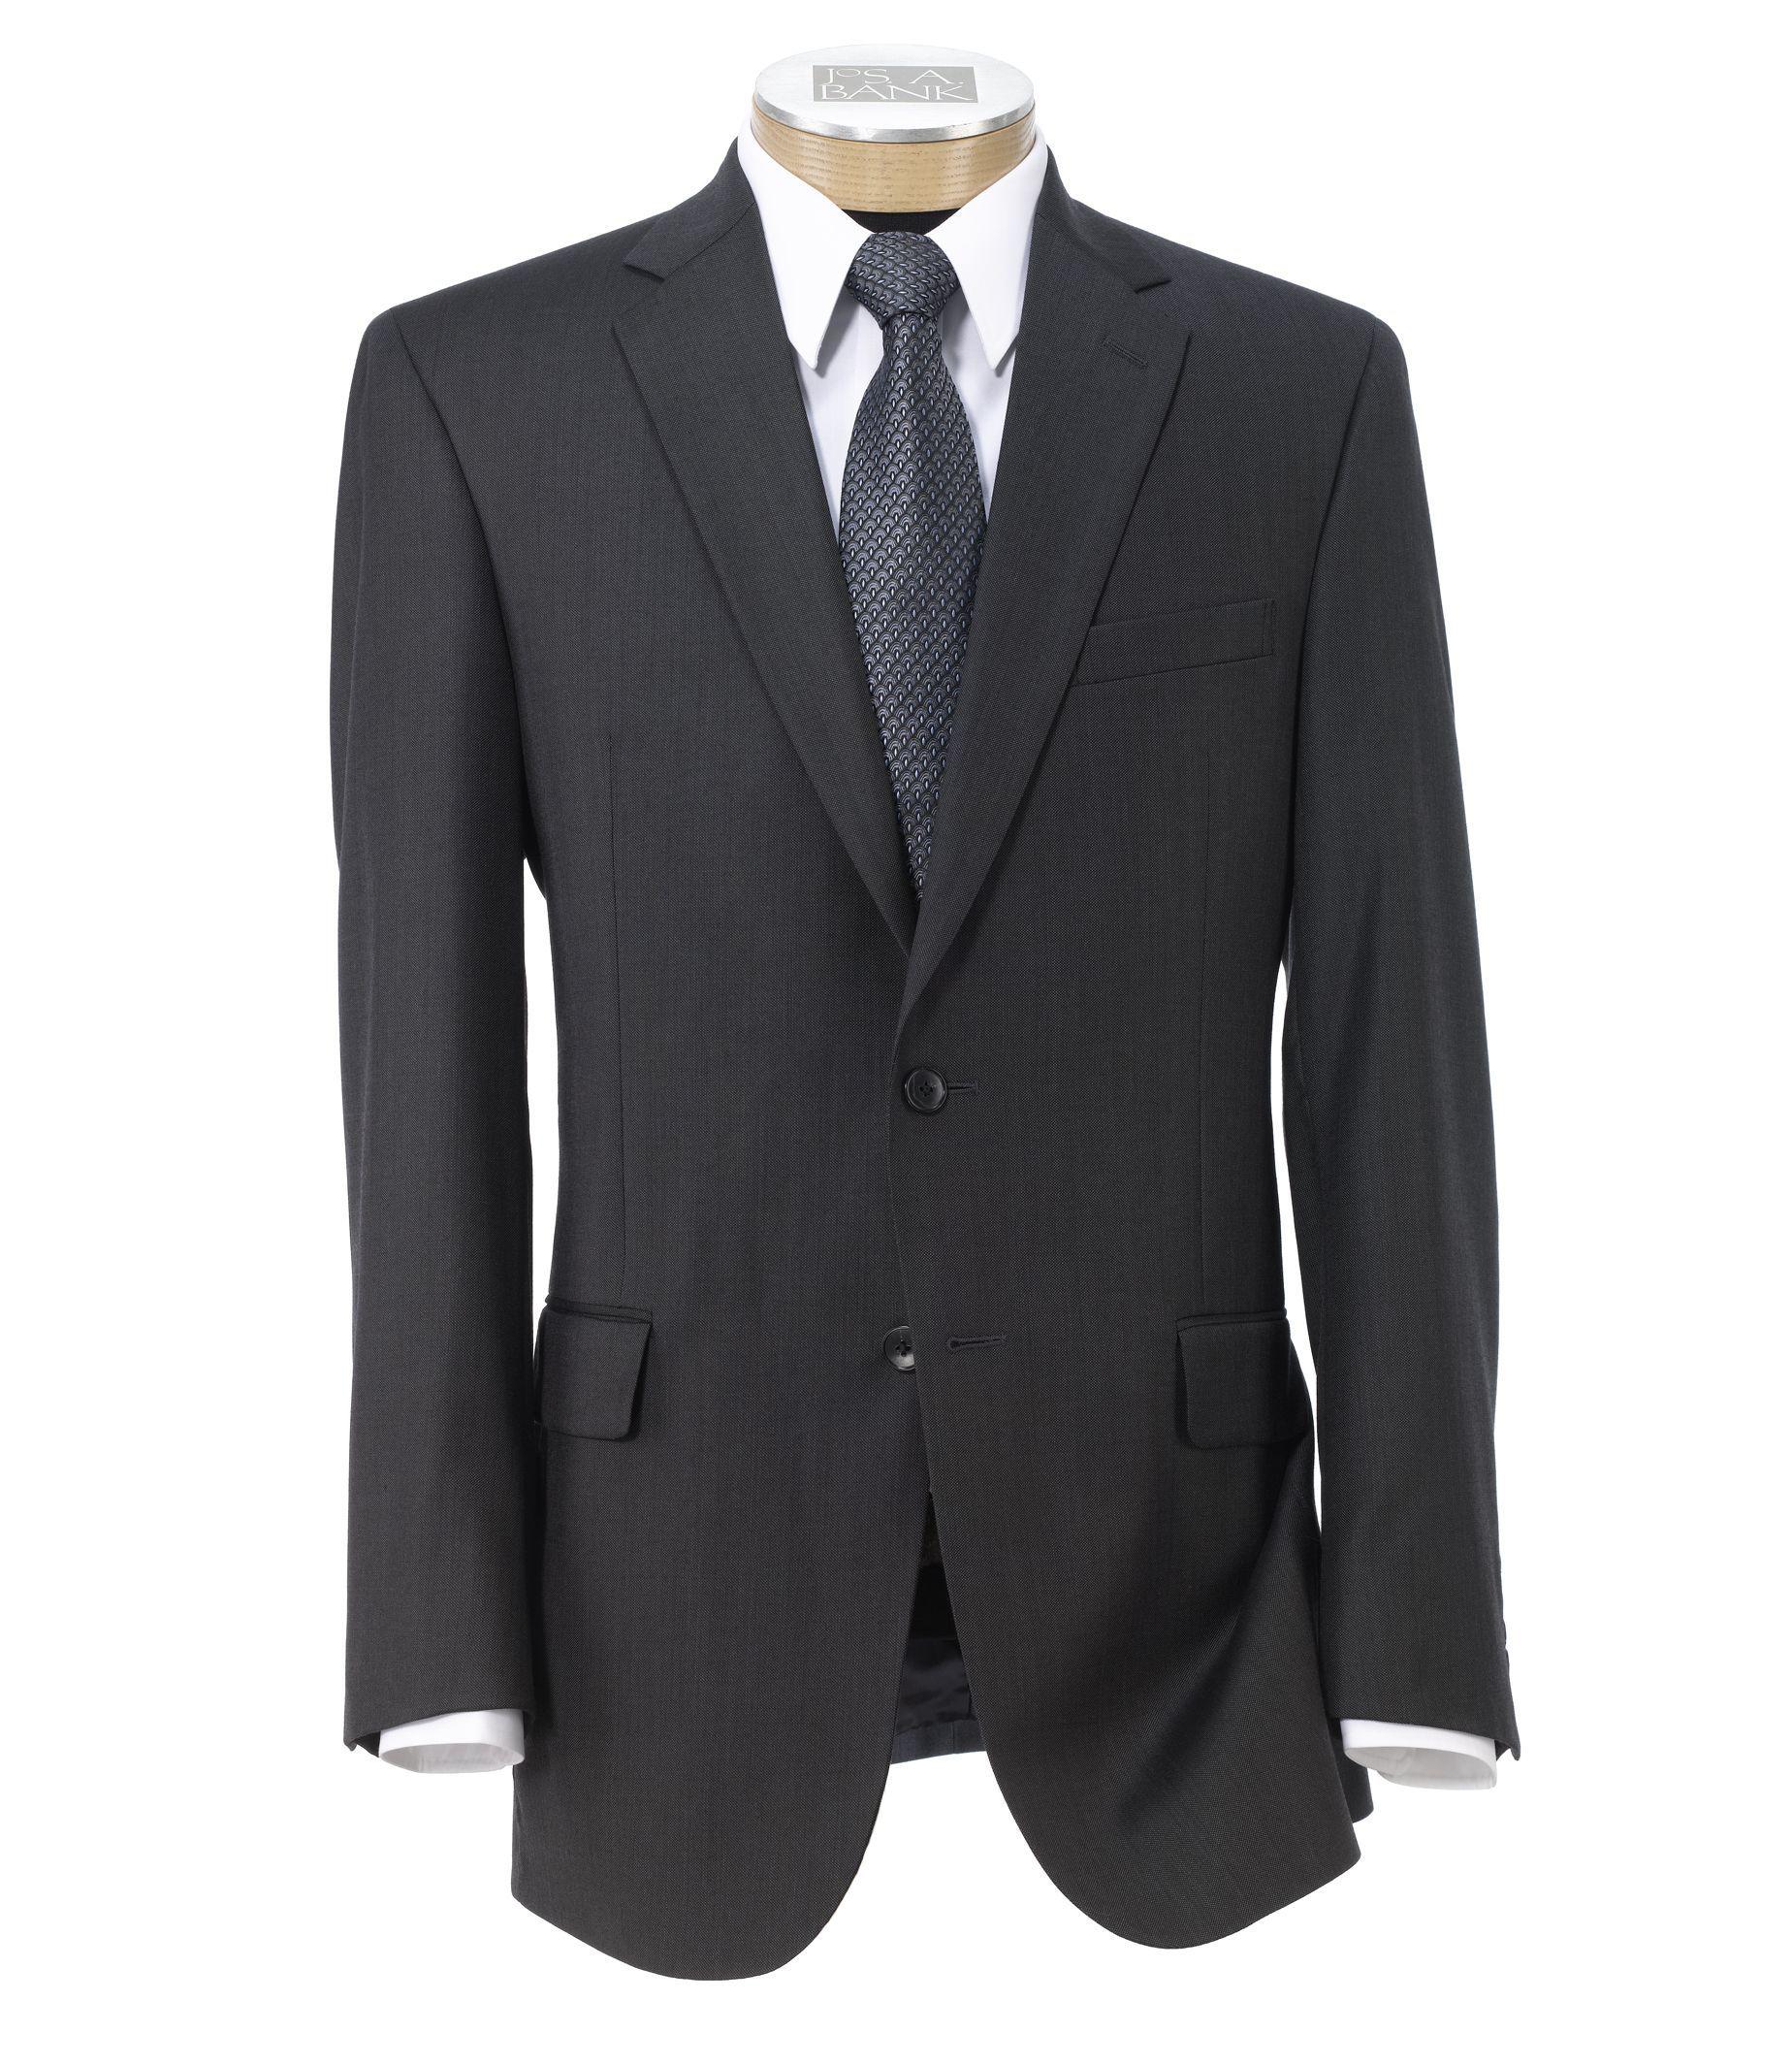 Lyst - Jos. A. Bank Traveler Collection Tailored Fit Suit in Gray for Men